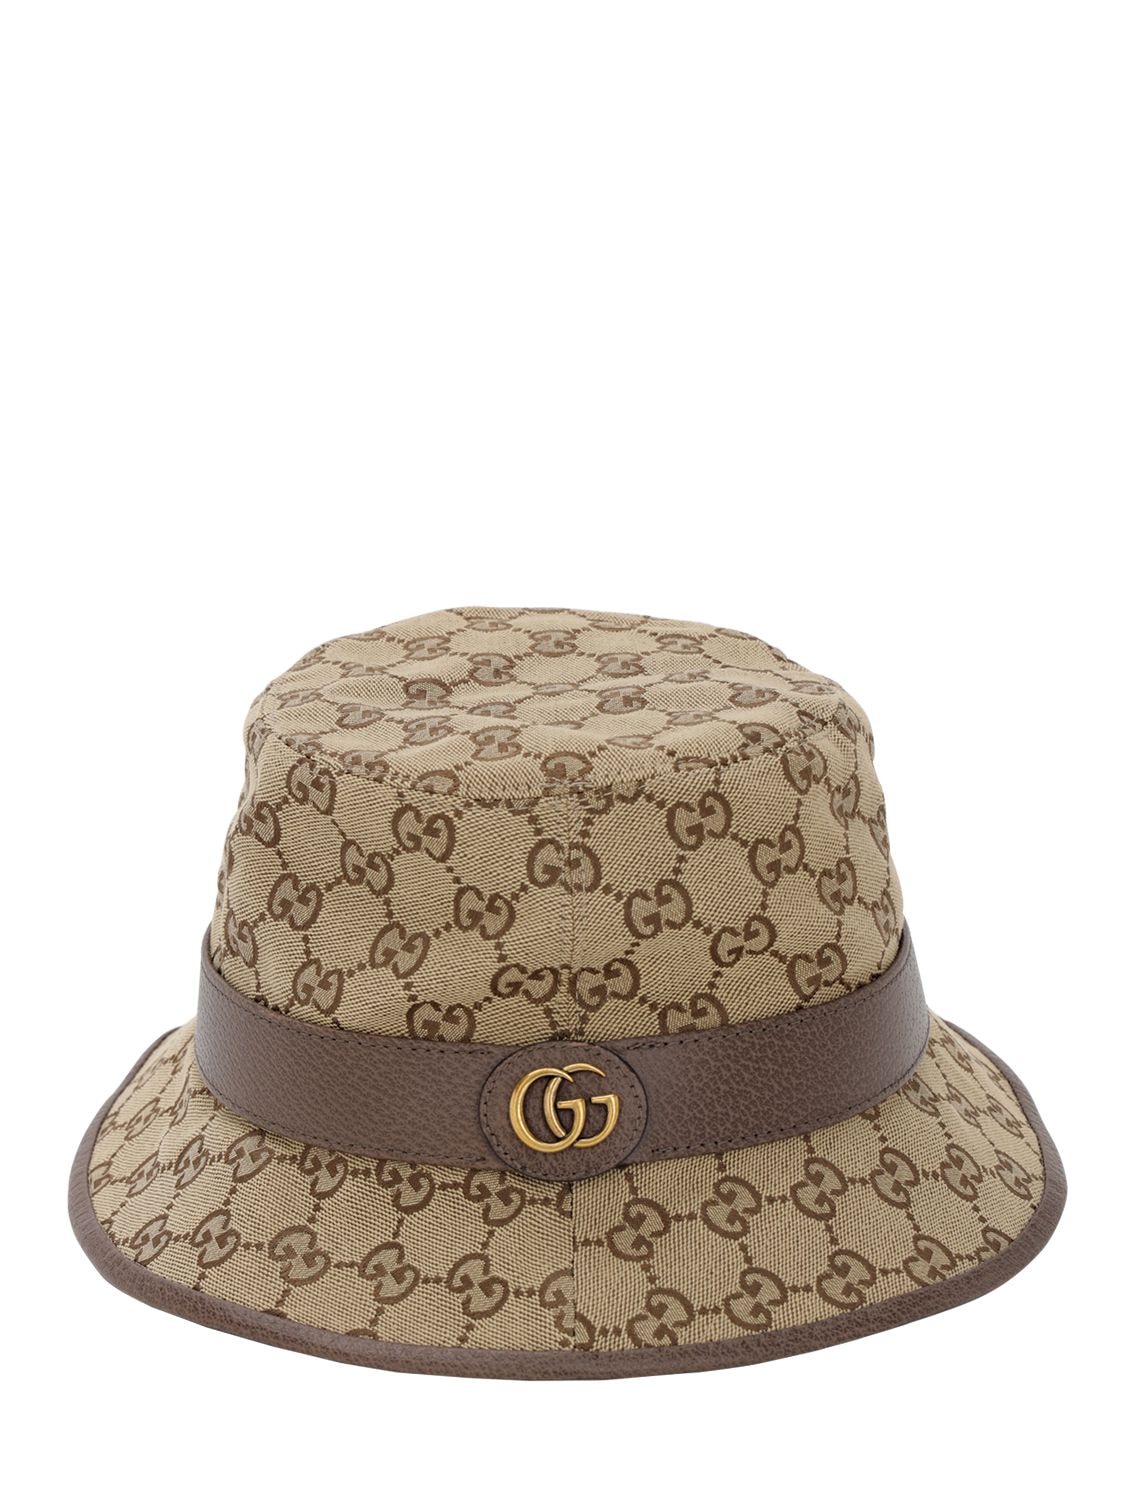 Image of Gg Cotton Canvas Bucket Hat